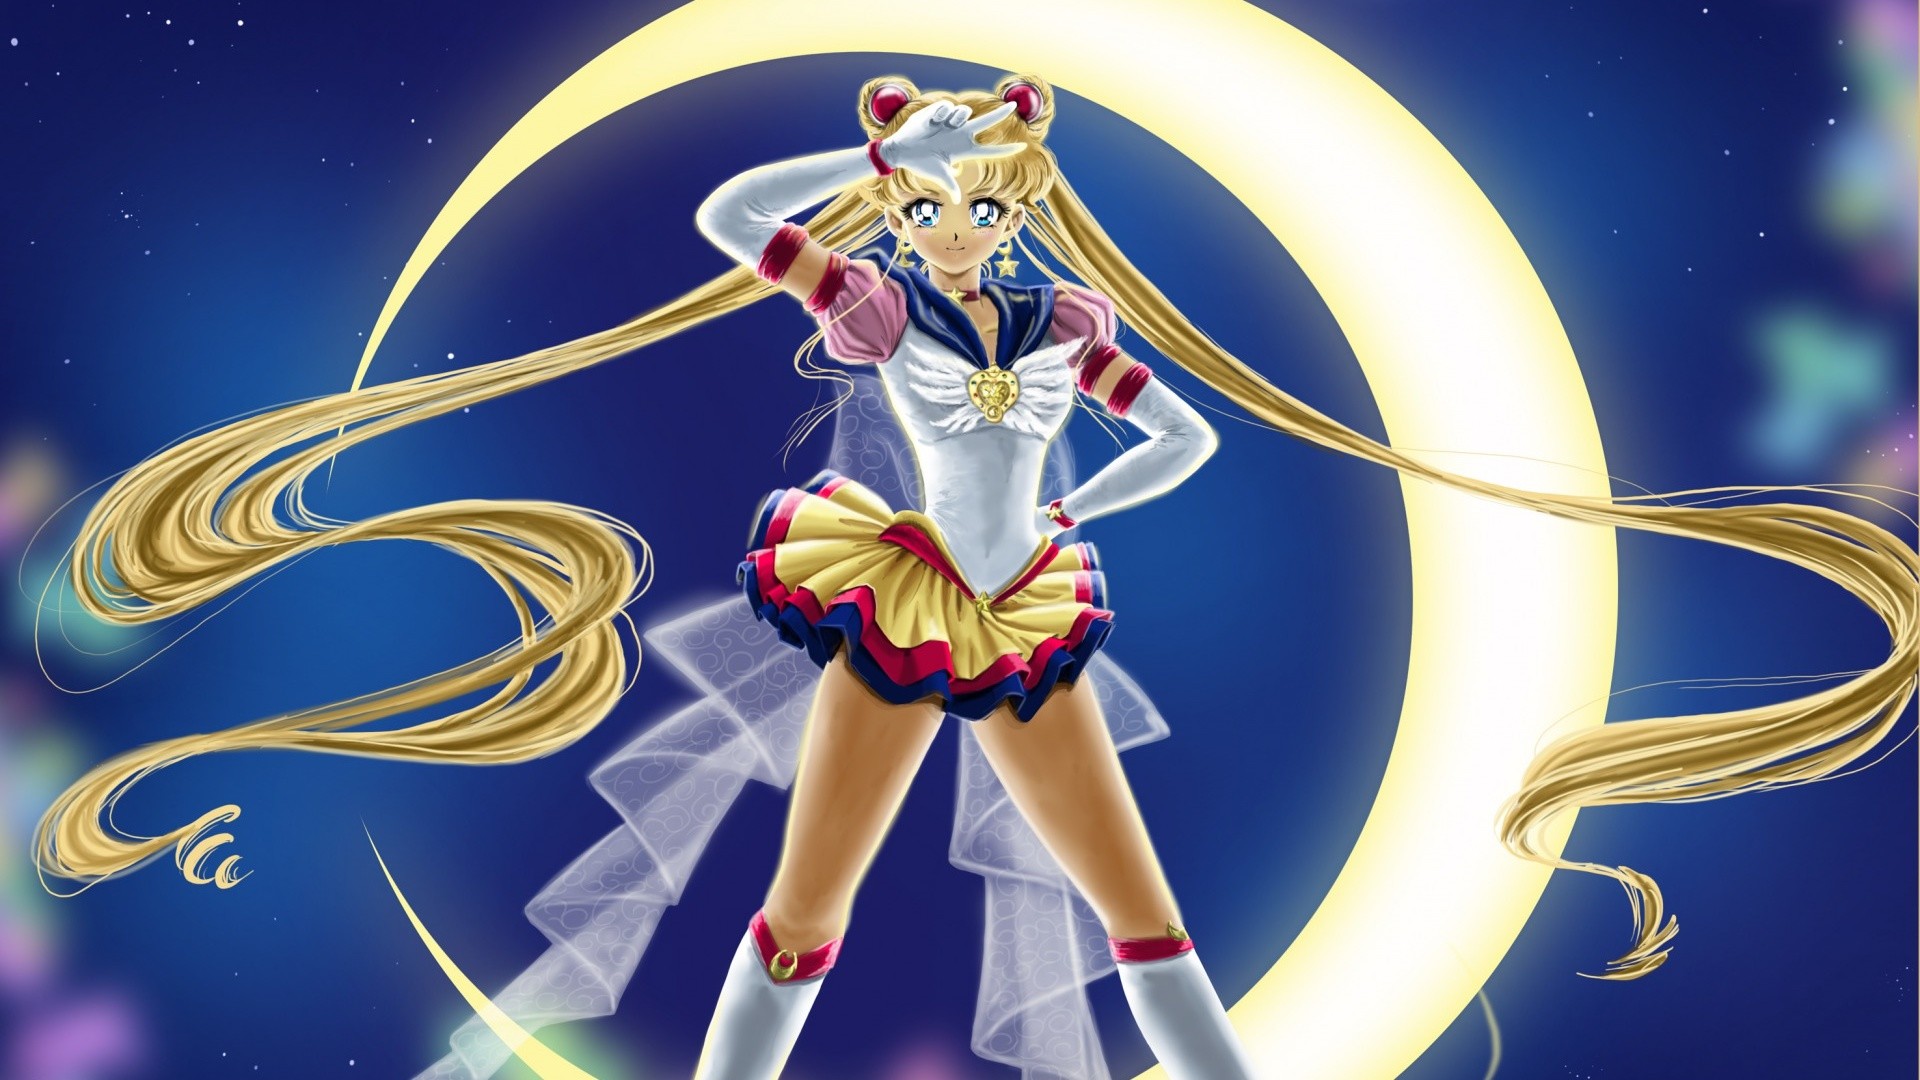 How cool is Eternal Sailor Moon without the big bulky wings